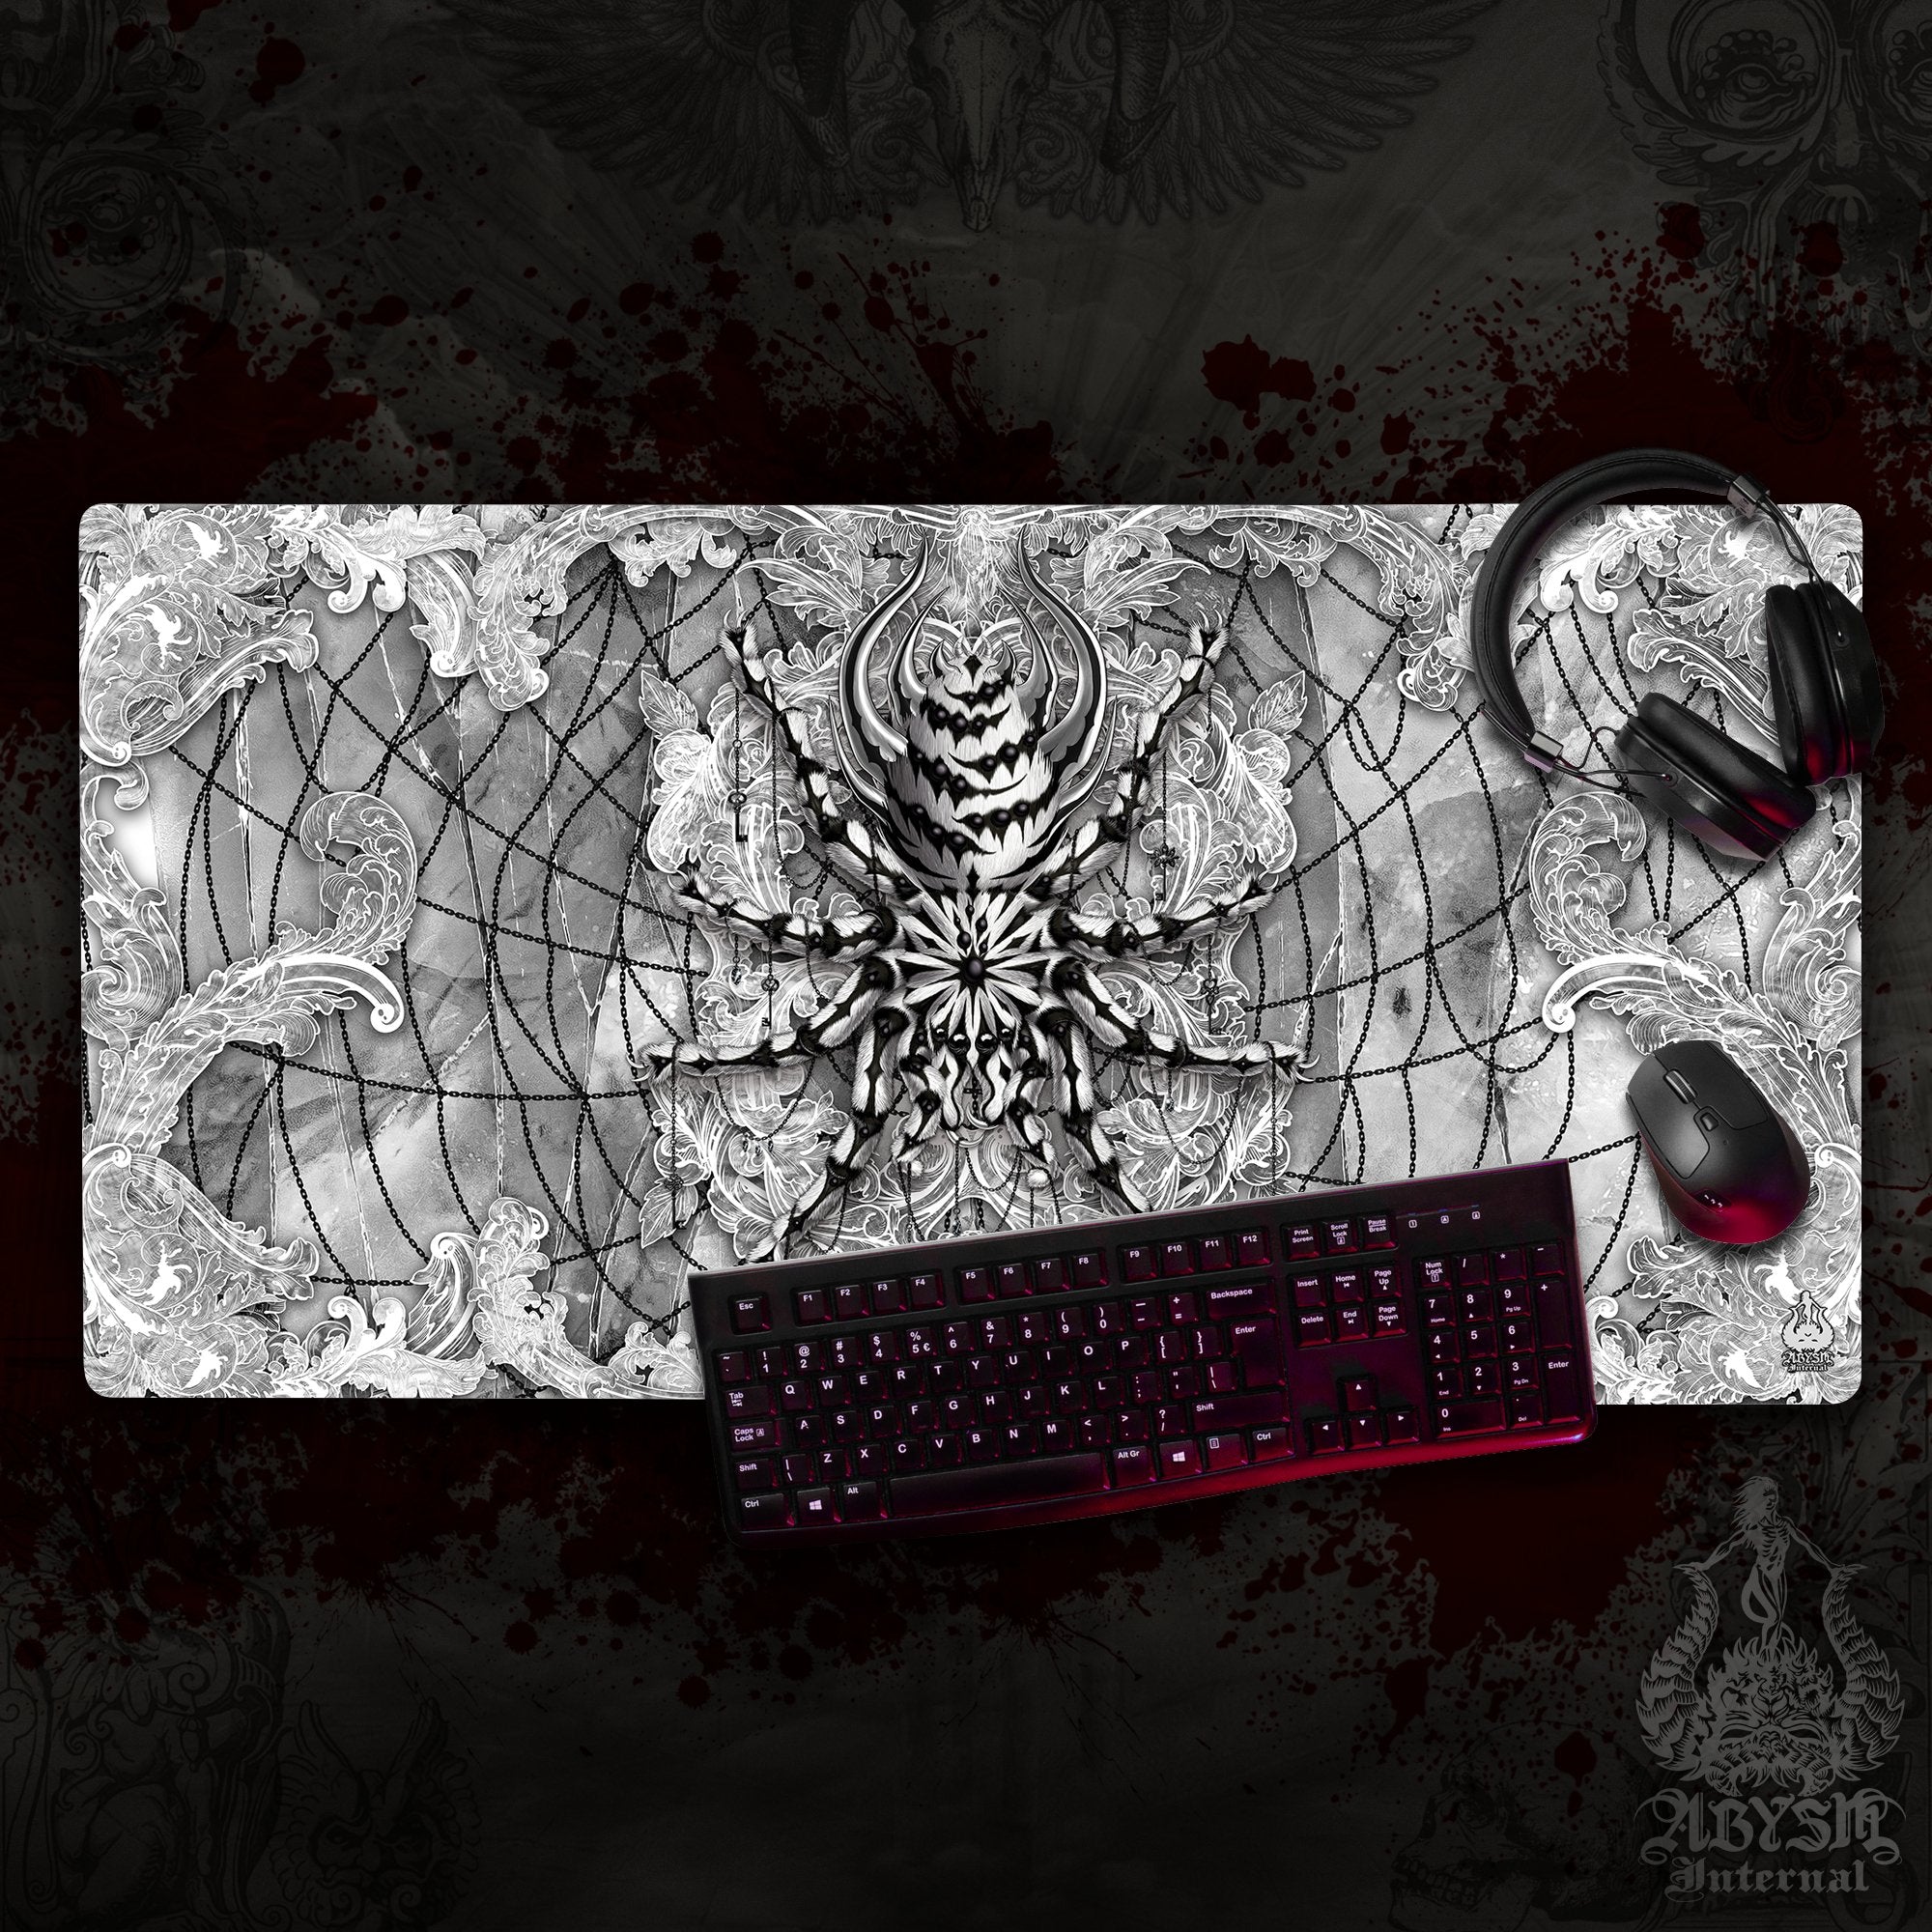 White Goth Mouse Pad, Spider Gaming Desk Mat, Tarantula Workpad, Halloween Table Protector Cover, Art Print - Stone, 3 Colors - Abysm Internal